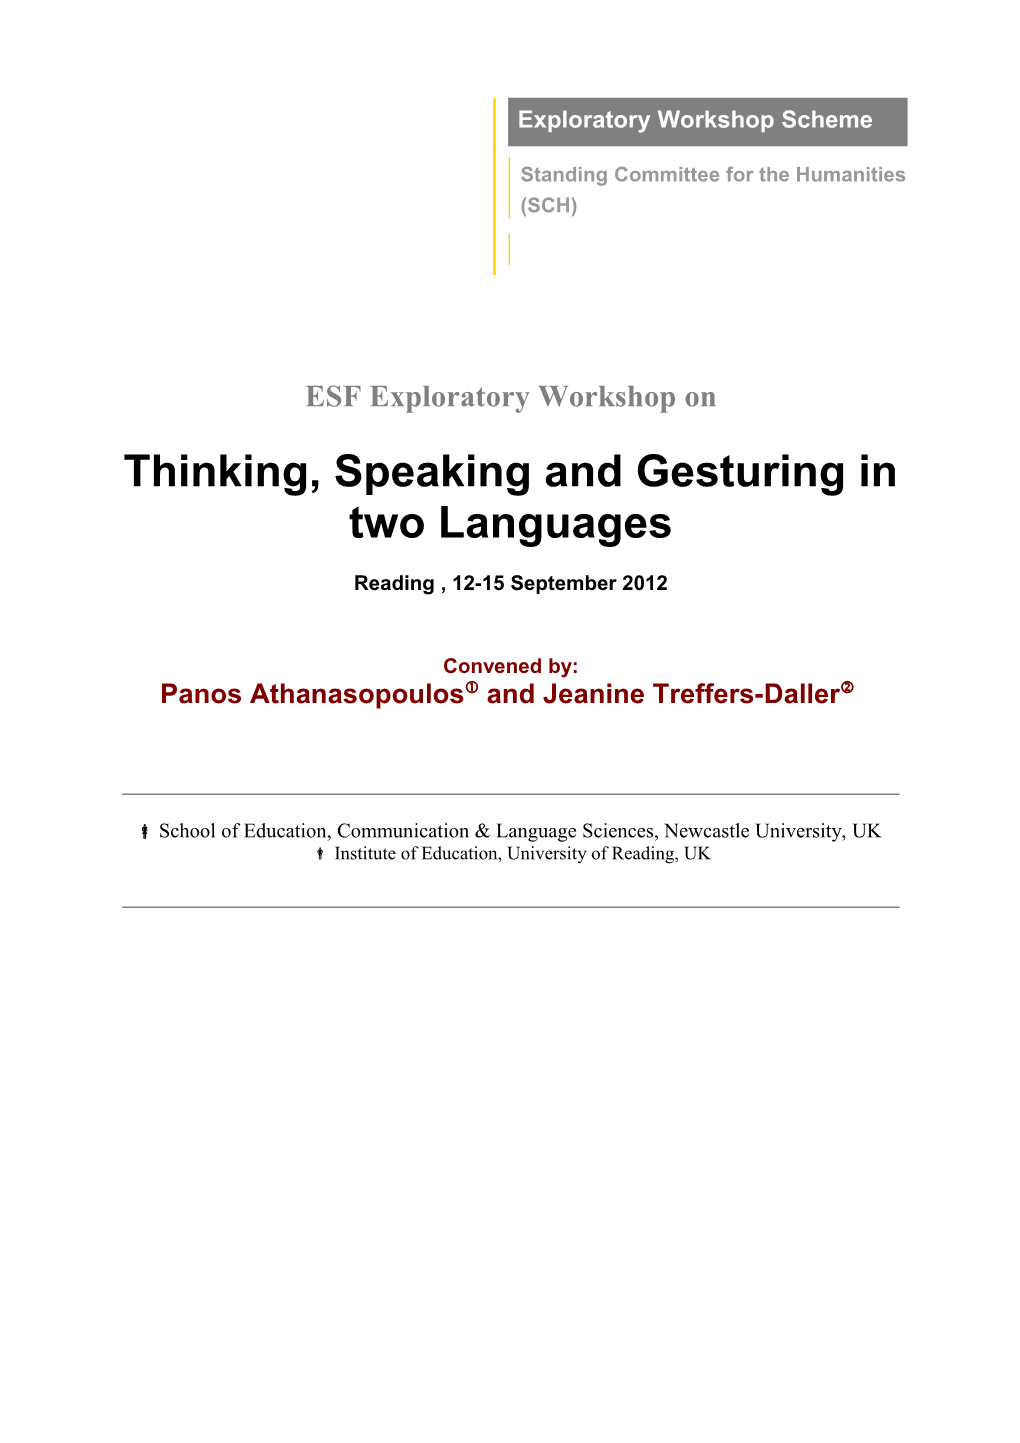 Thinking, Speaking and Gesturing in Two Languages